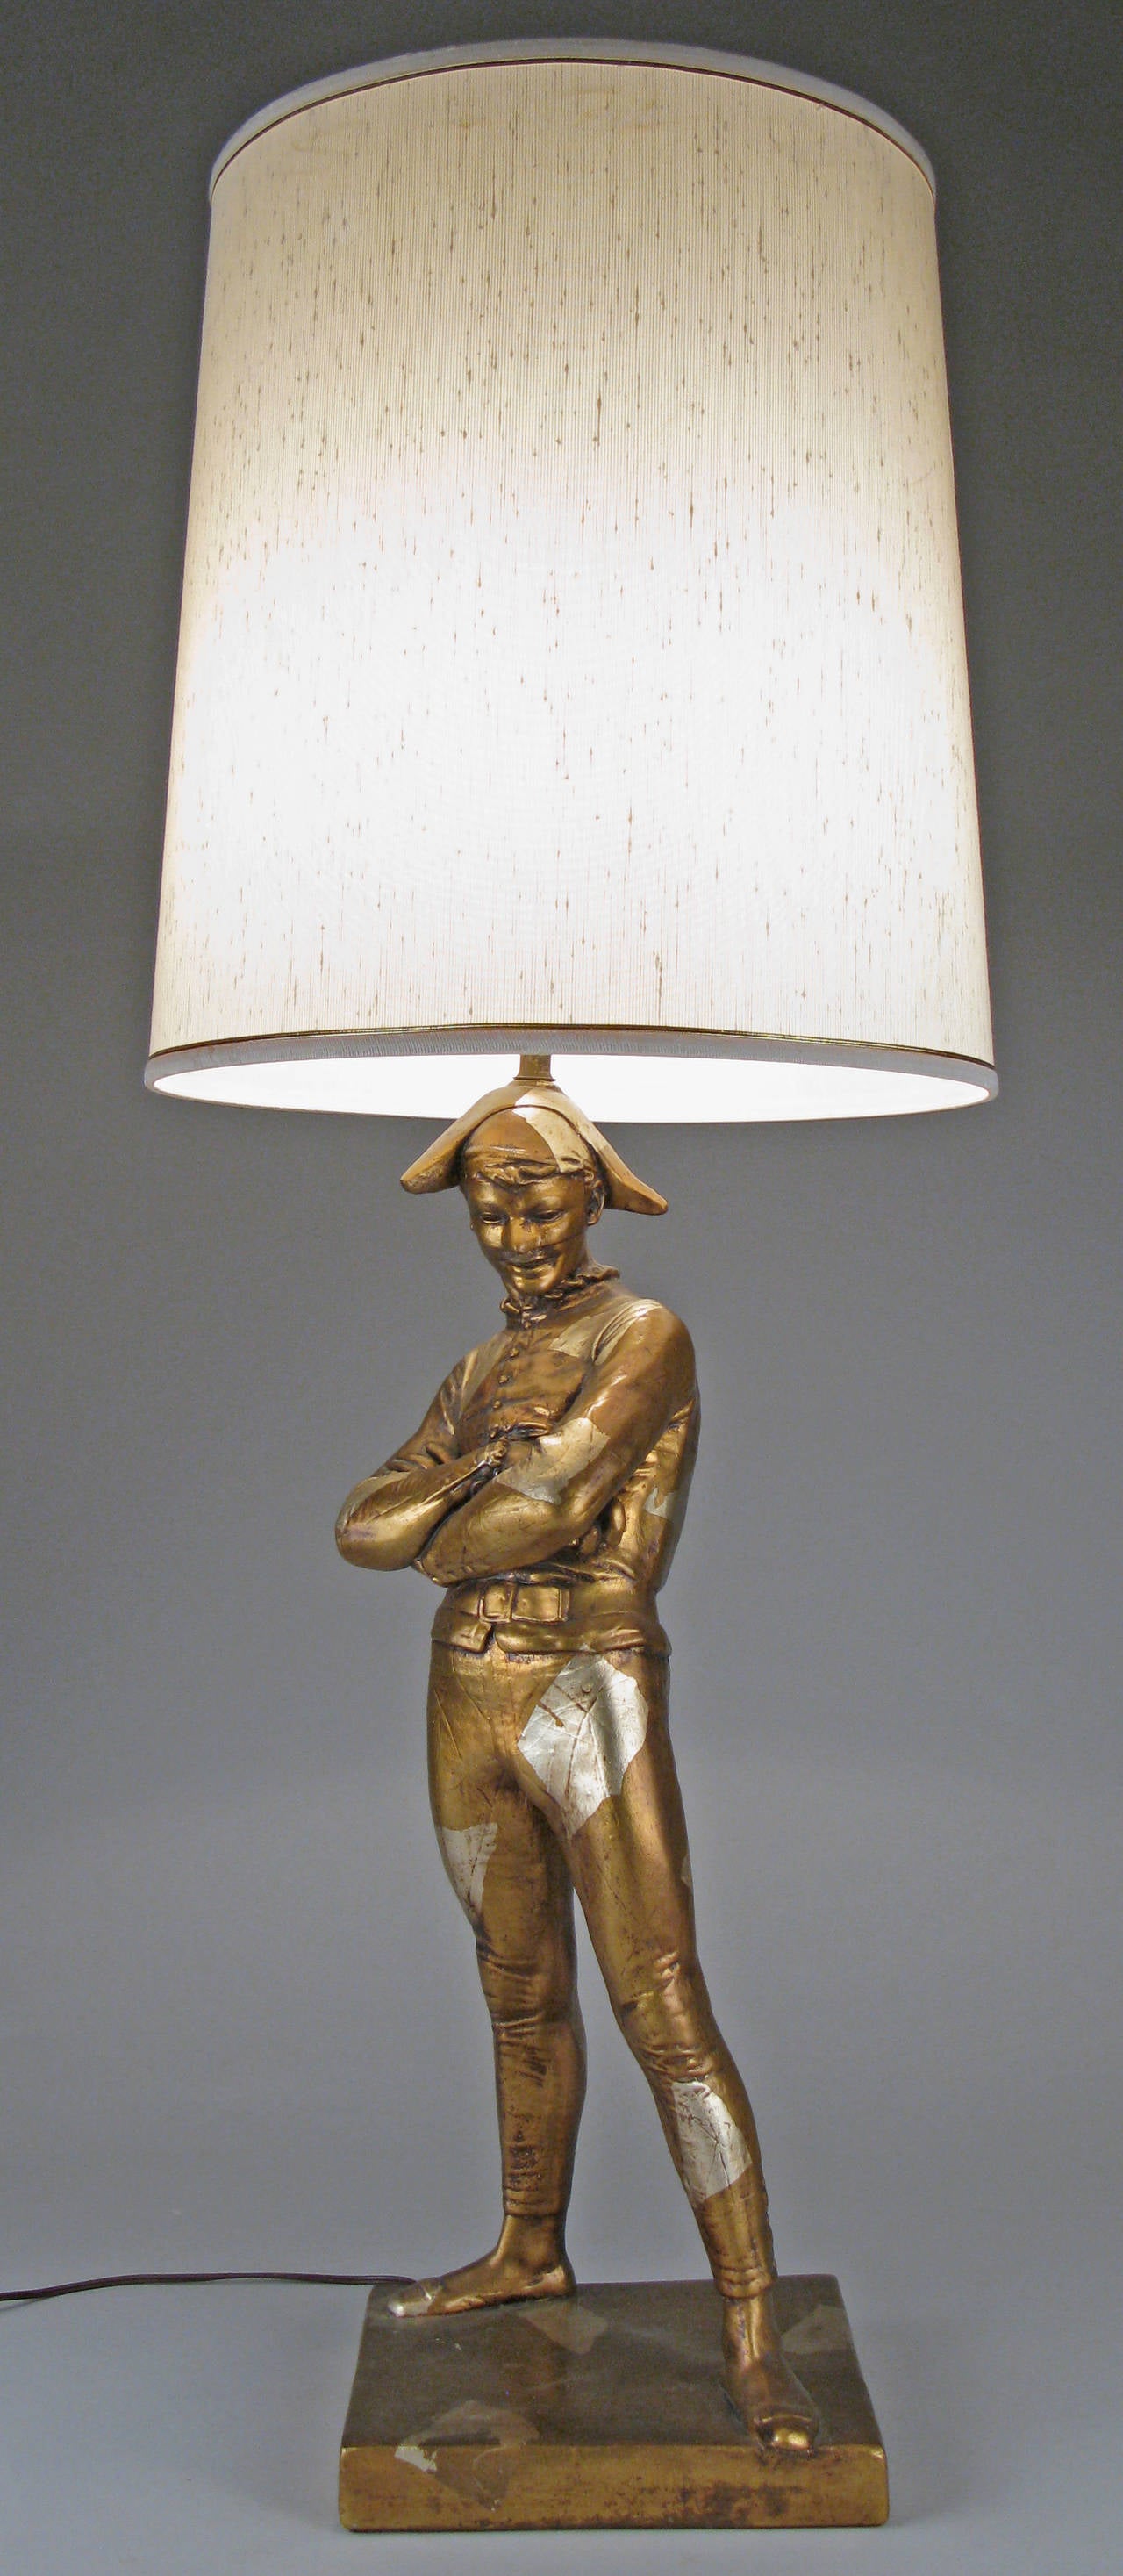 A very charming and well made 1960s plaster lamp in the form of a court jester finished in a harlequin pattern in gold and silver leaf. Classic form in very good condition.

Height of the jester is 27